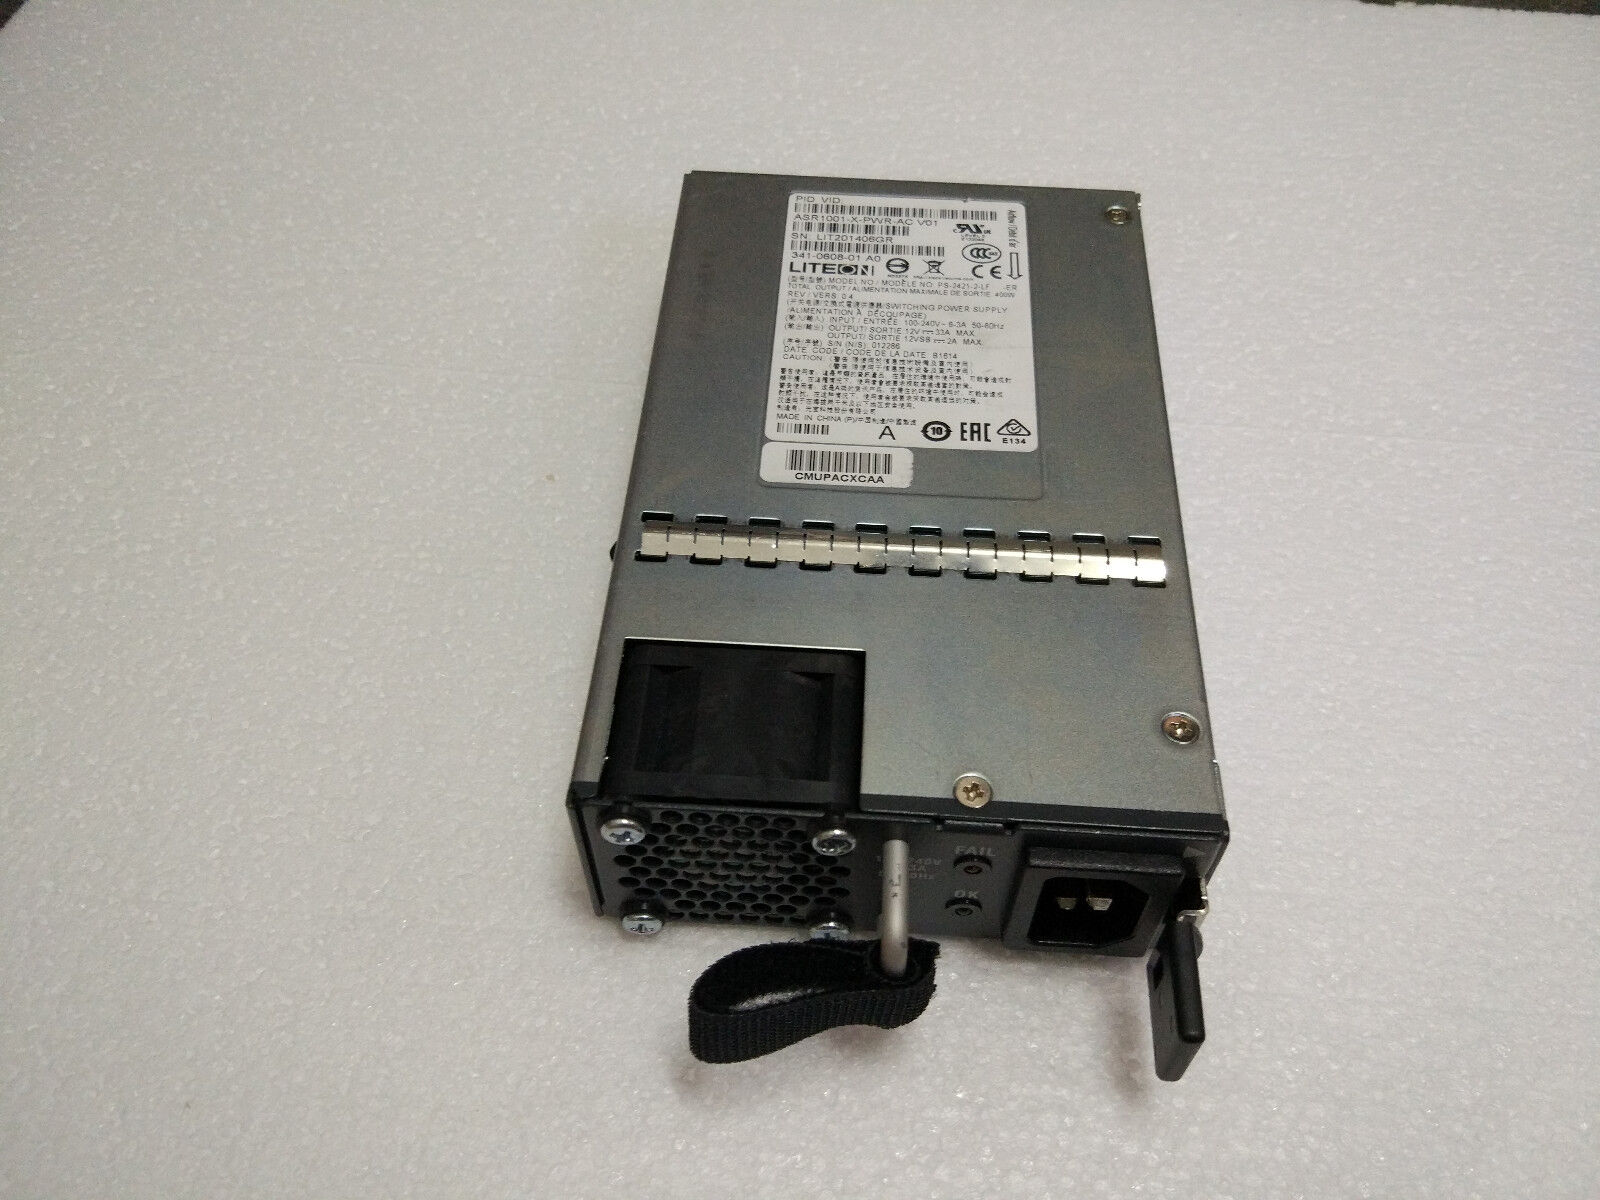 Genuine Cisco ASR1001-X-PWR-AC Power Suply 341-0608-01 for ASR1001X Running well